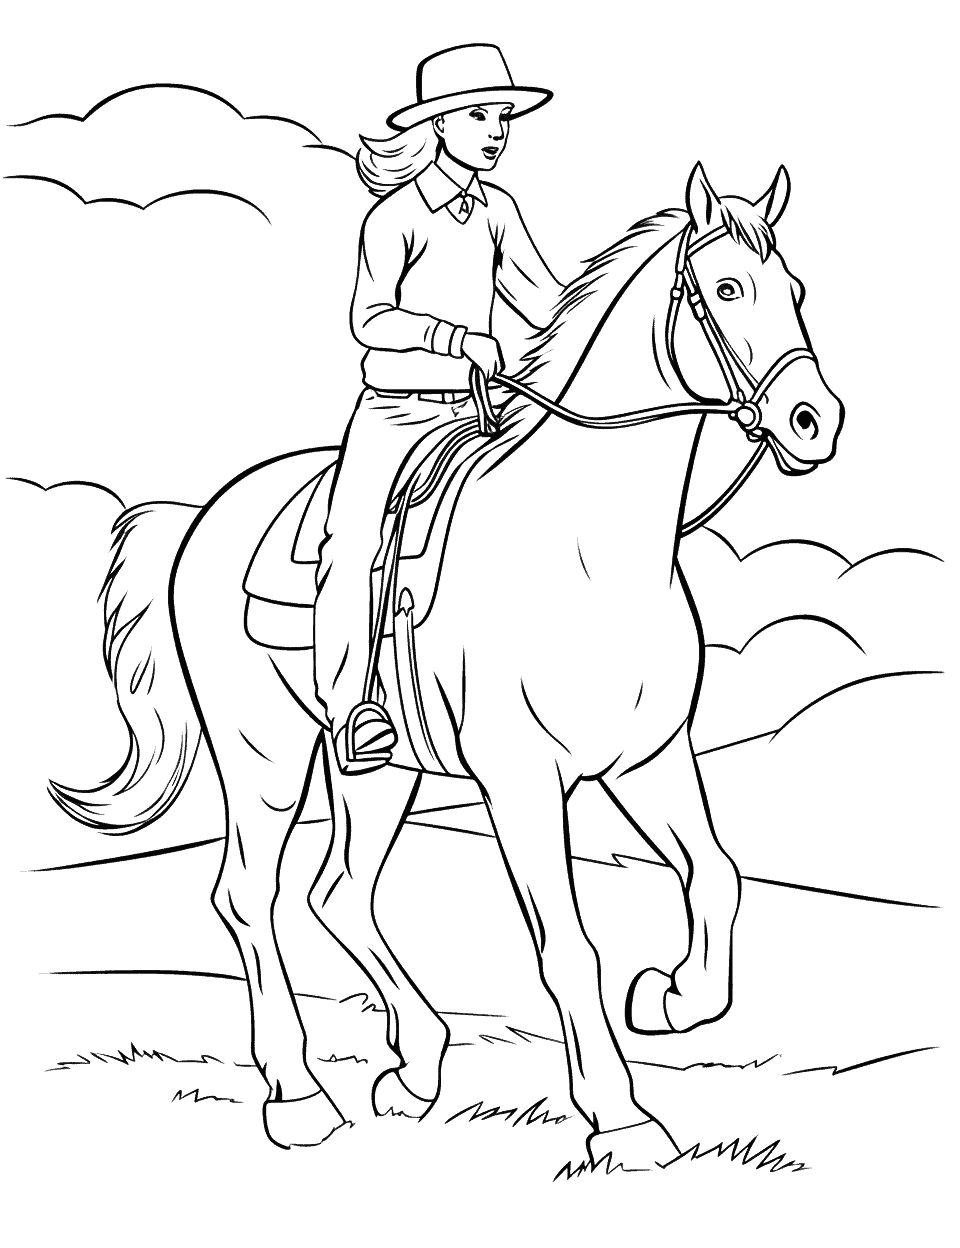 Western Rodeo Scene Horse Coloring Page - A thrilling western rodeo scene with a horse and its rider.